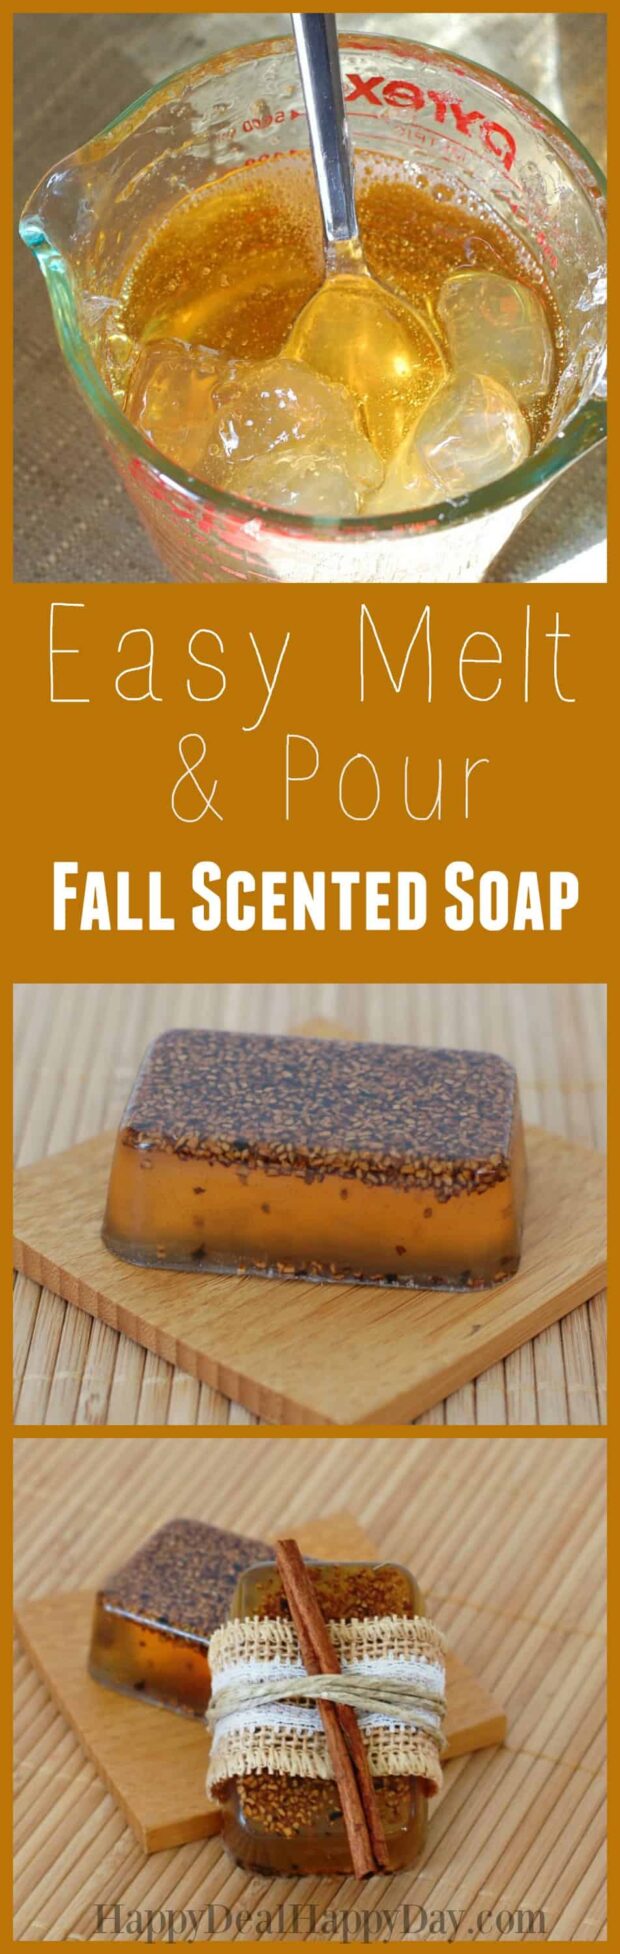 DIY Project- Scented Homemade Soap Bars - Homemade Soap Recipes, Homemade Soap Bars, Homemade Soap, DIY Soap Recipes